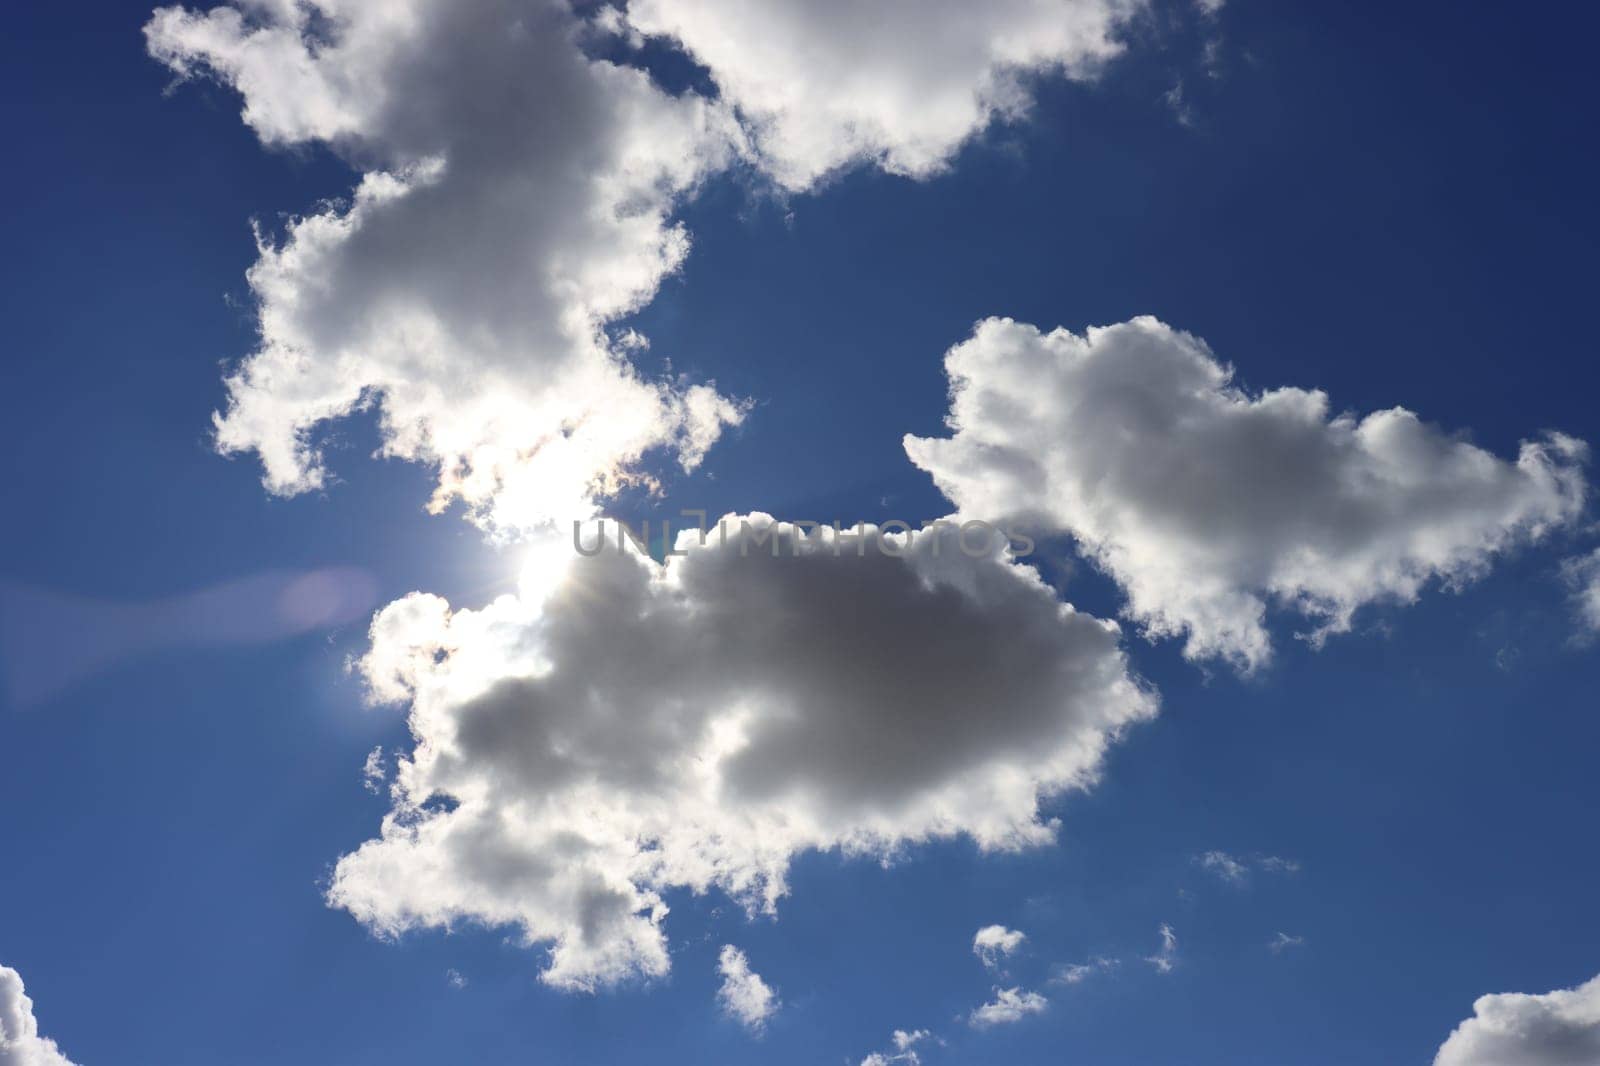 The bright sun during the day is covered by small clouds; light penetrates through the clouds.